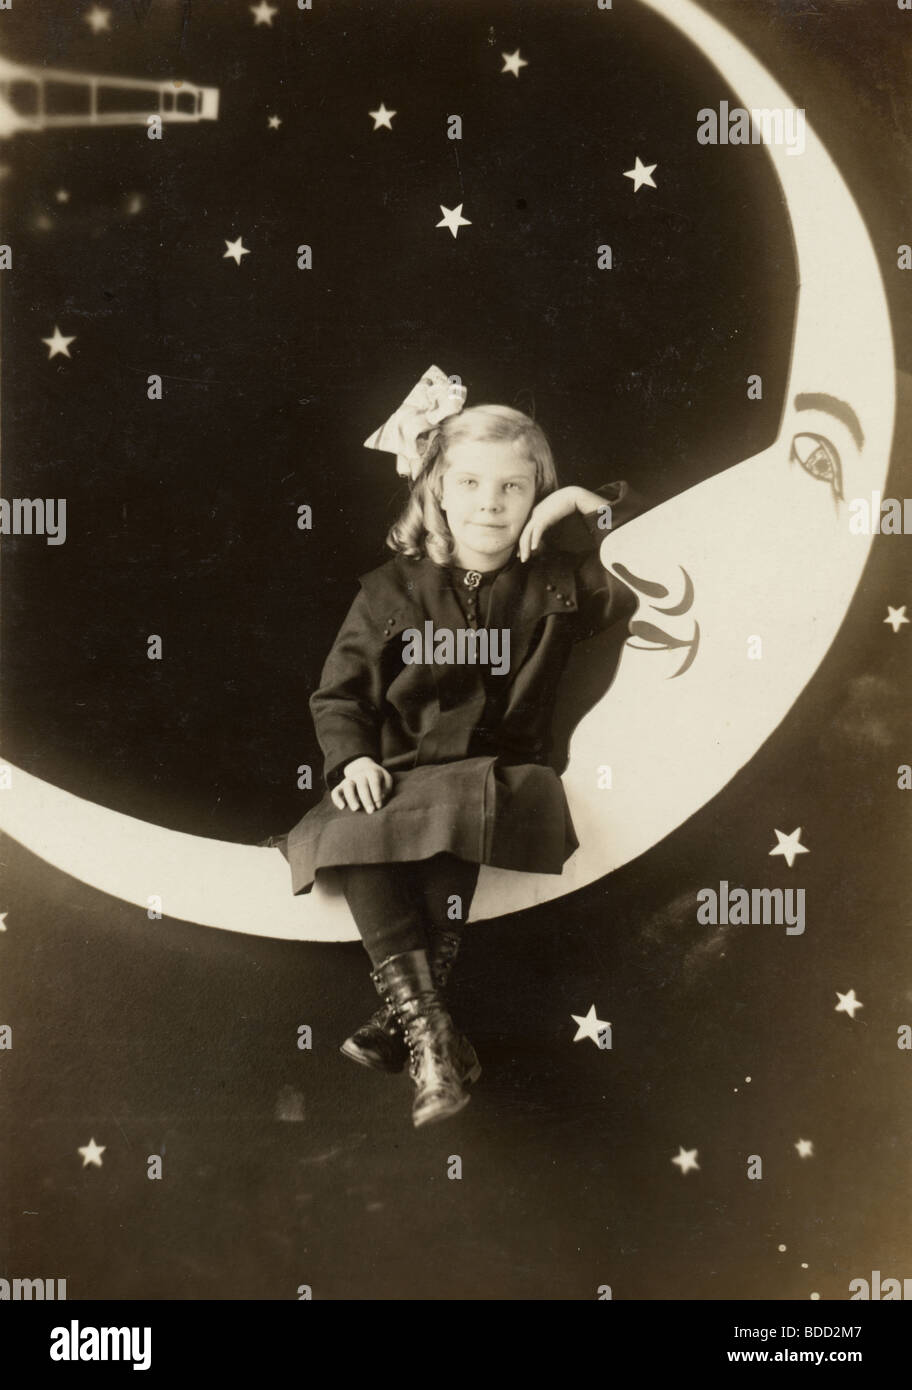 Paper moon movie hi-res stock photography and images - Alamy